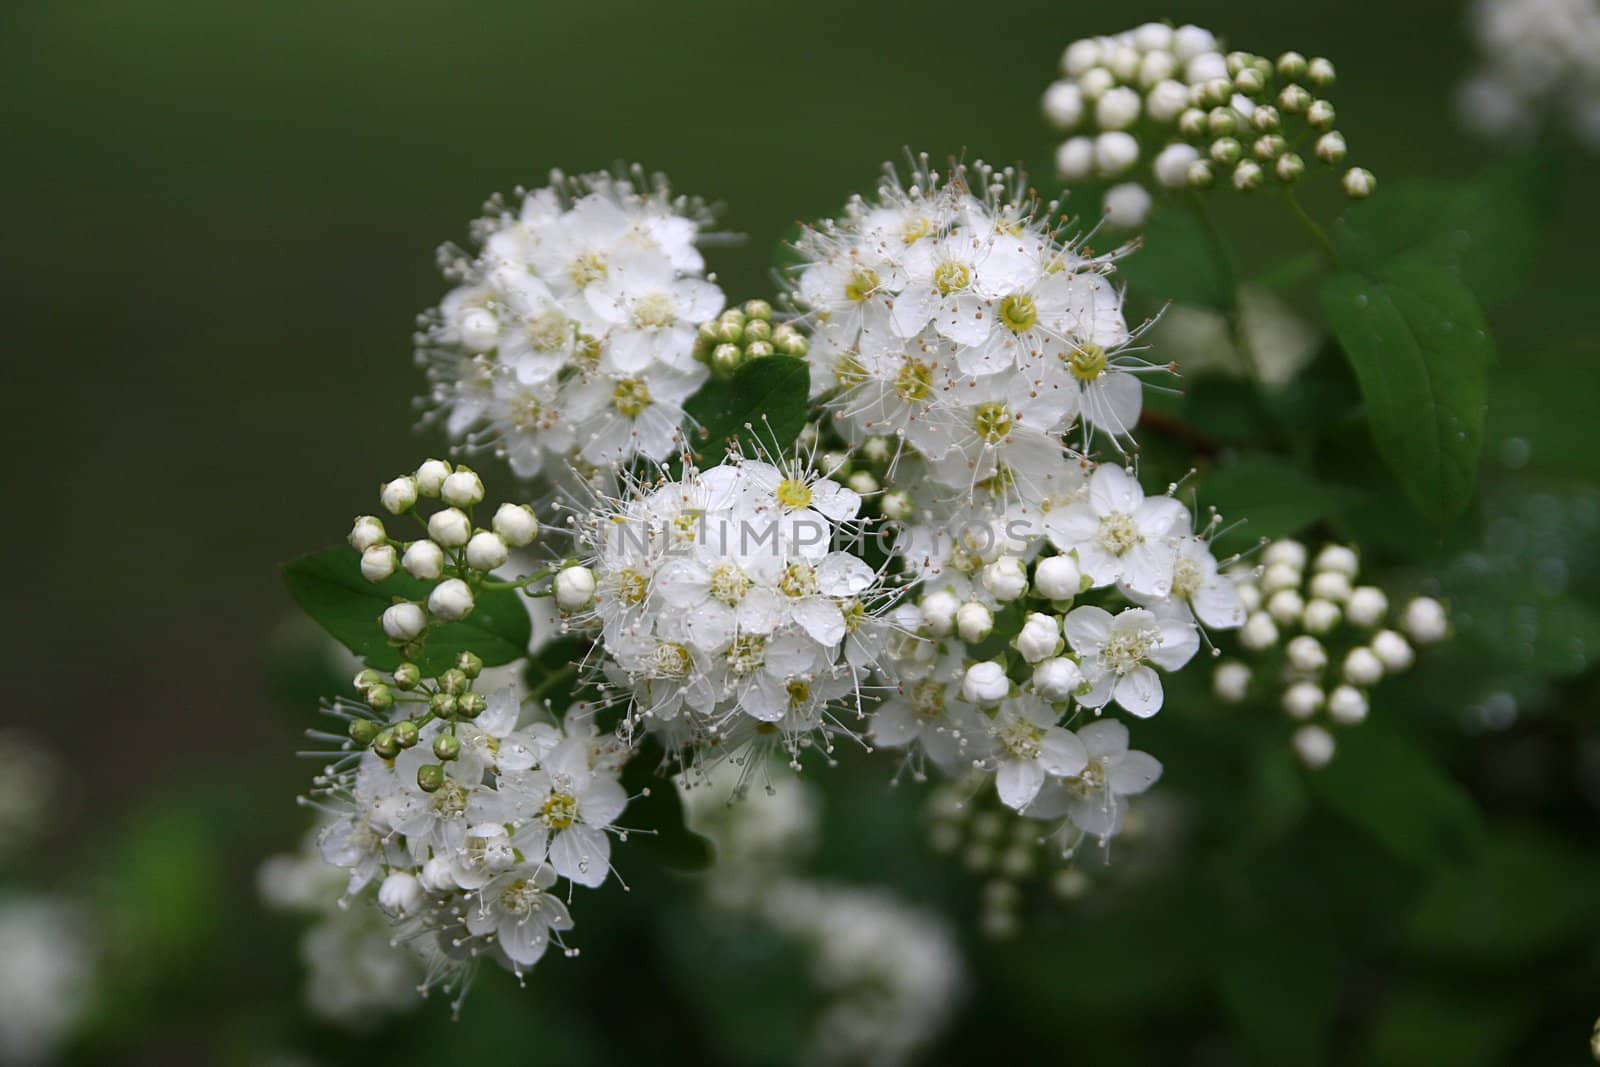 Group of white flowers and flower buds